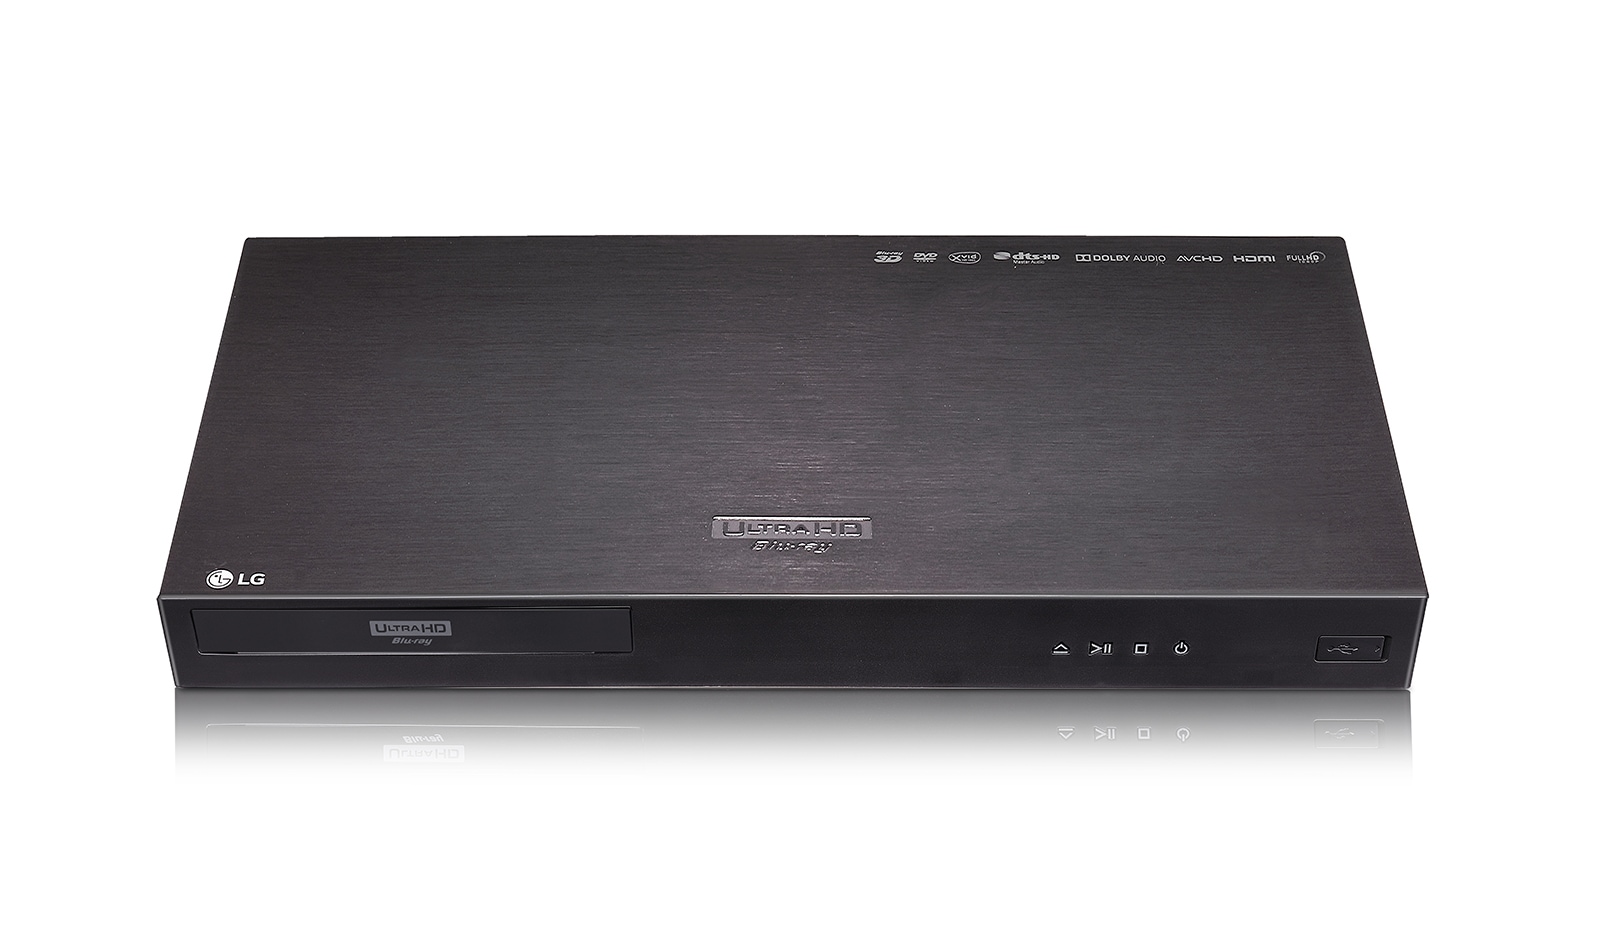 There's a new 4K UHD Blu-ray Player in town!, StereoNET Australia